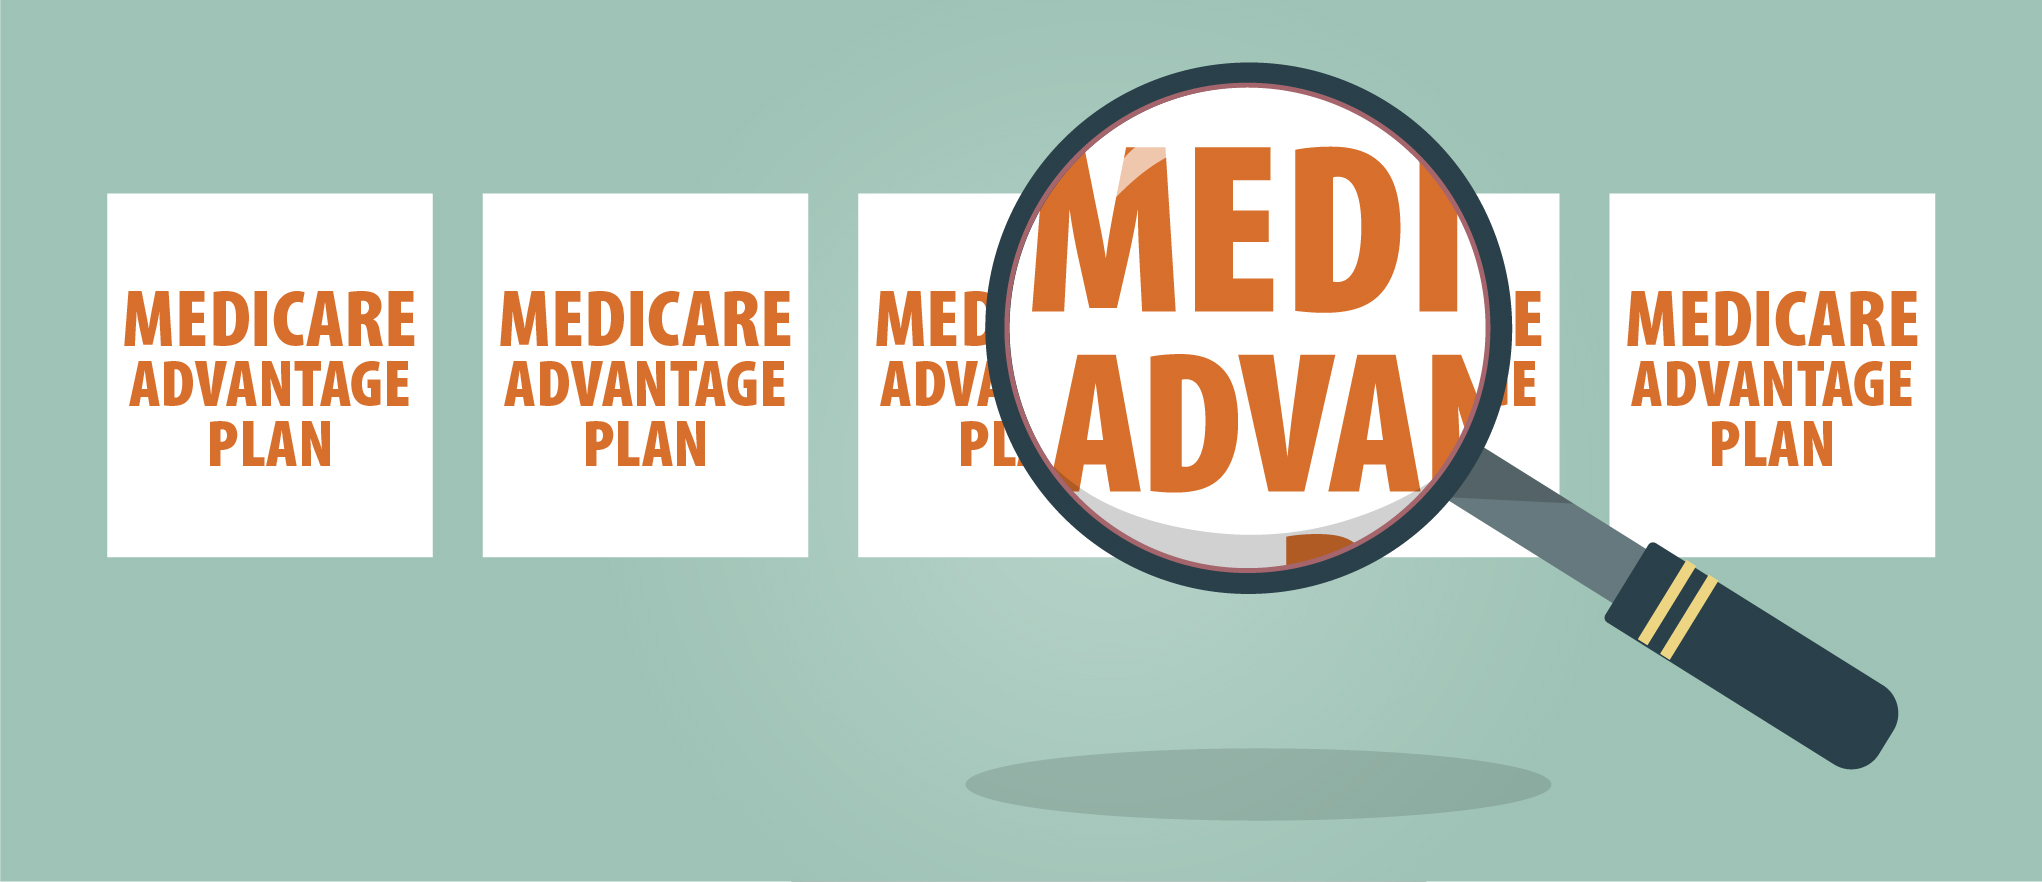 An illustrative depictions of Center for Medicare Services and Medicare Advantage plans.